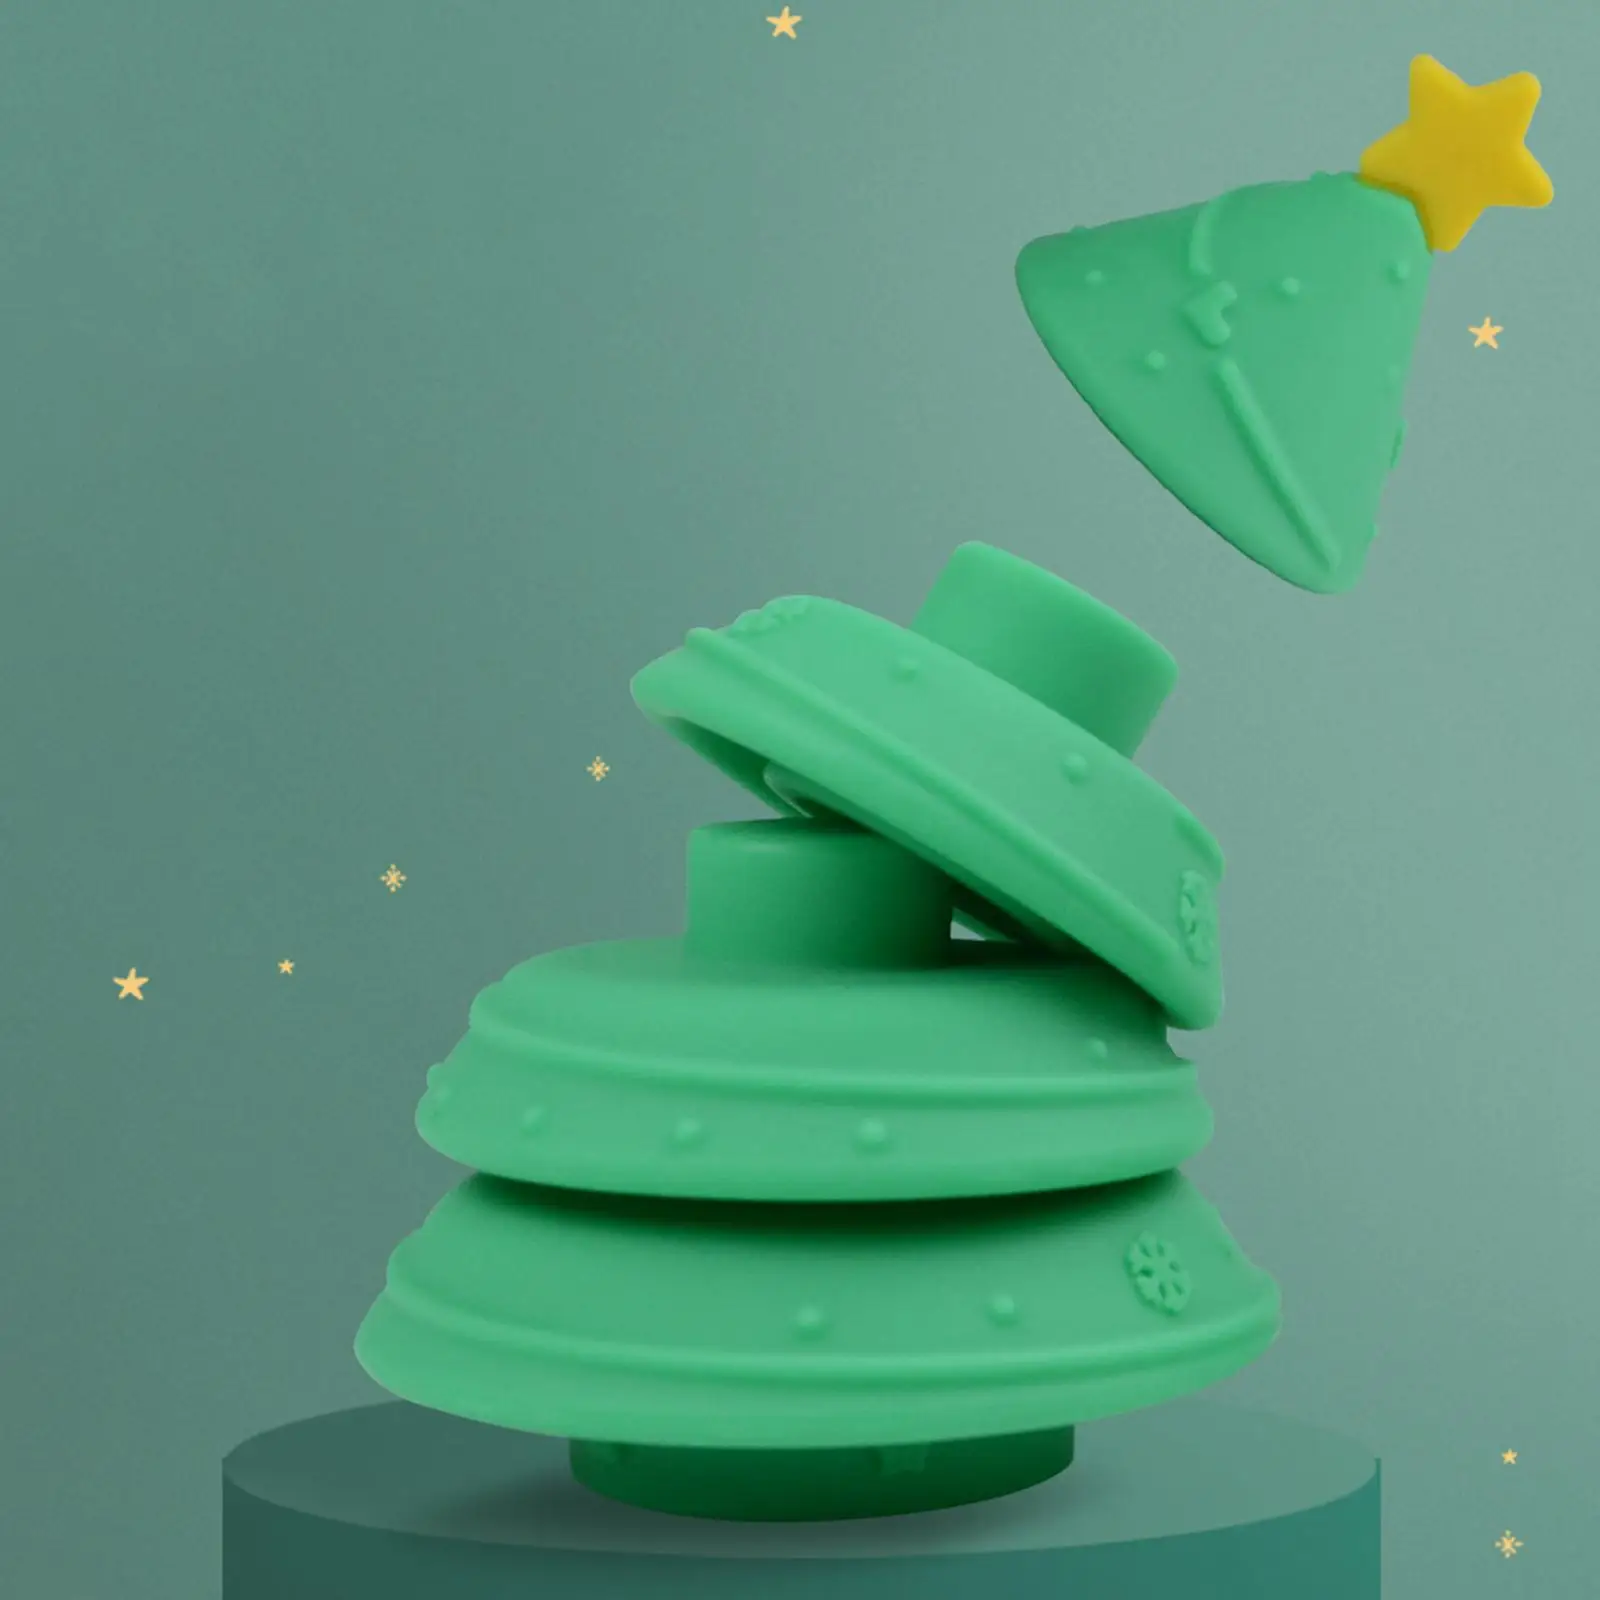 Montessori Silicone Stack Toy Early Educational Learning Toy Building Puzzle Shape Cognition for Children Preschool Kids